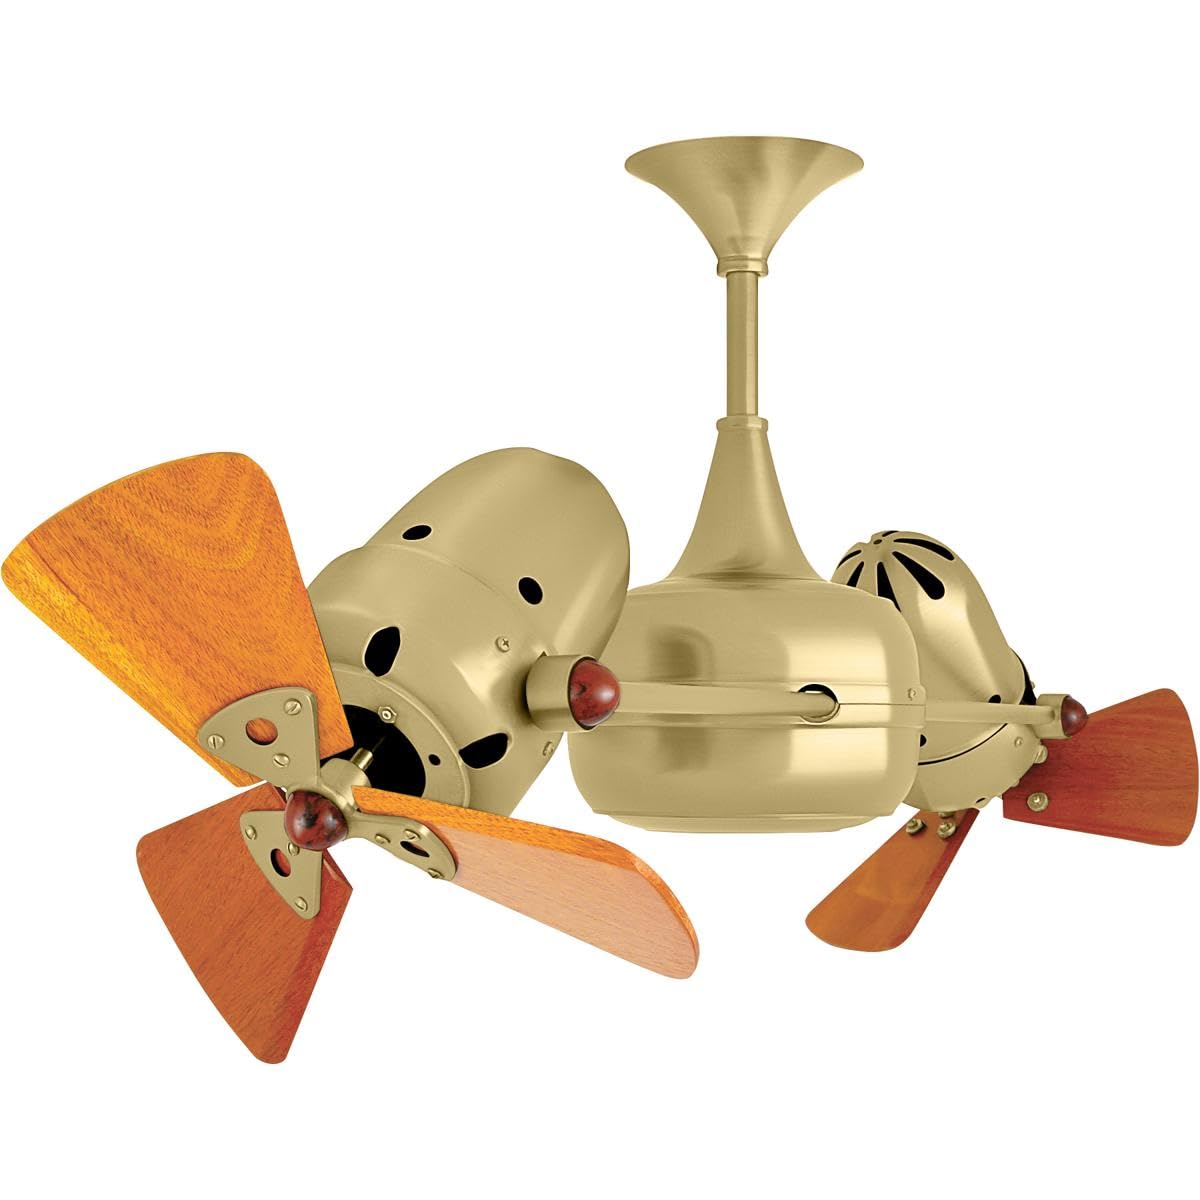 Matthews Fan DD-BRBR-WD Duplo Dinamico 360” rotational dual head ceiling fan in Brushed Brass finish with solid sustainable mahogany wood blades.